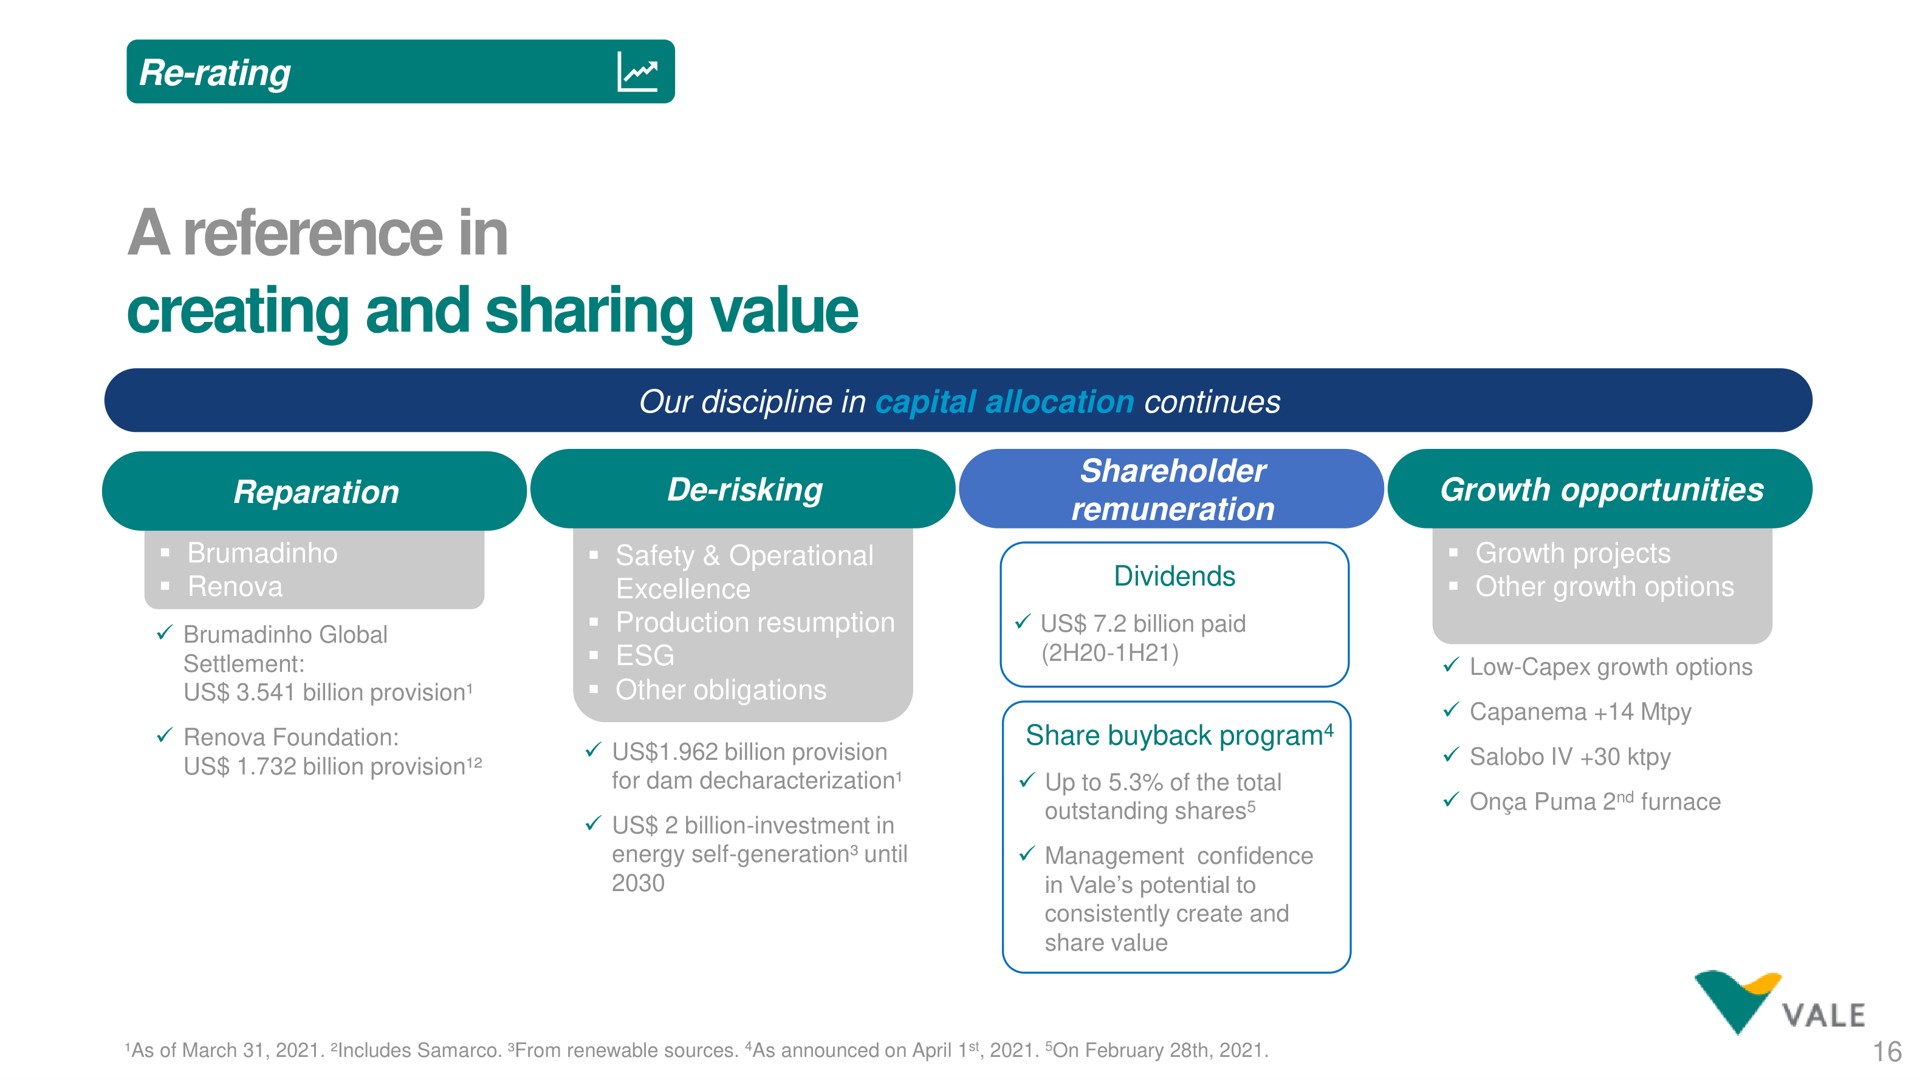 a reference in creating and sharing value rating us billion provision provision | Vale